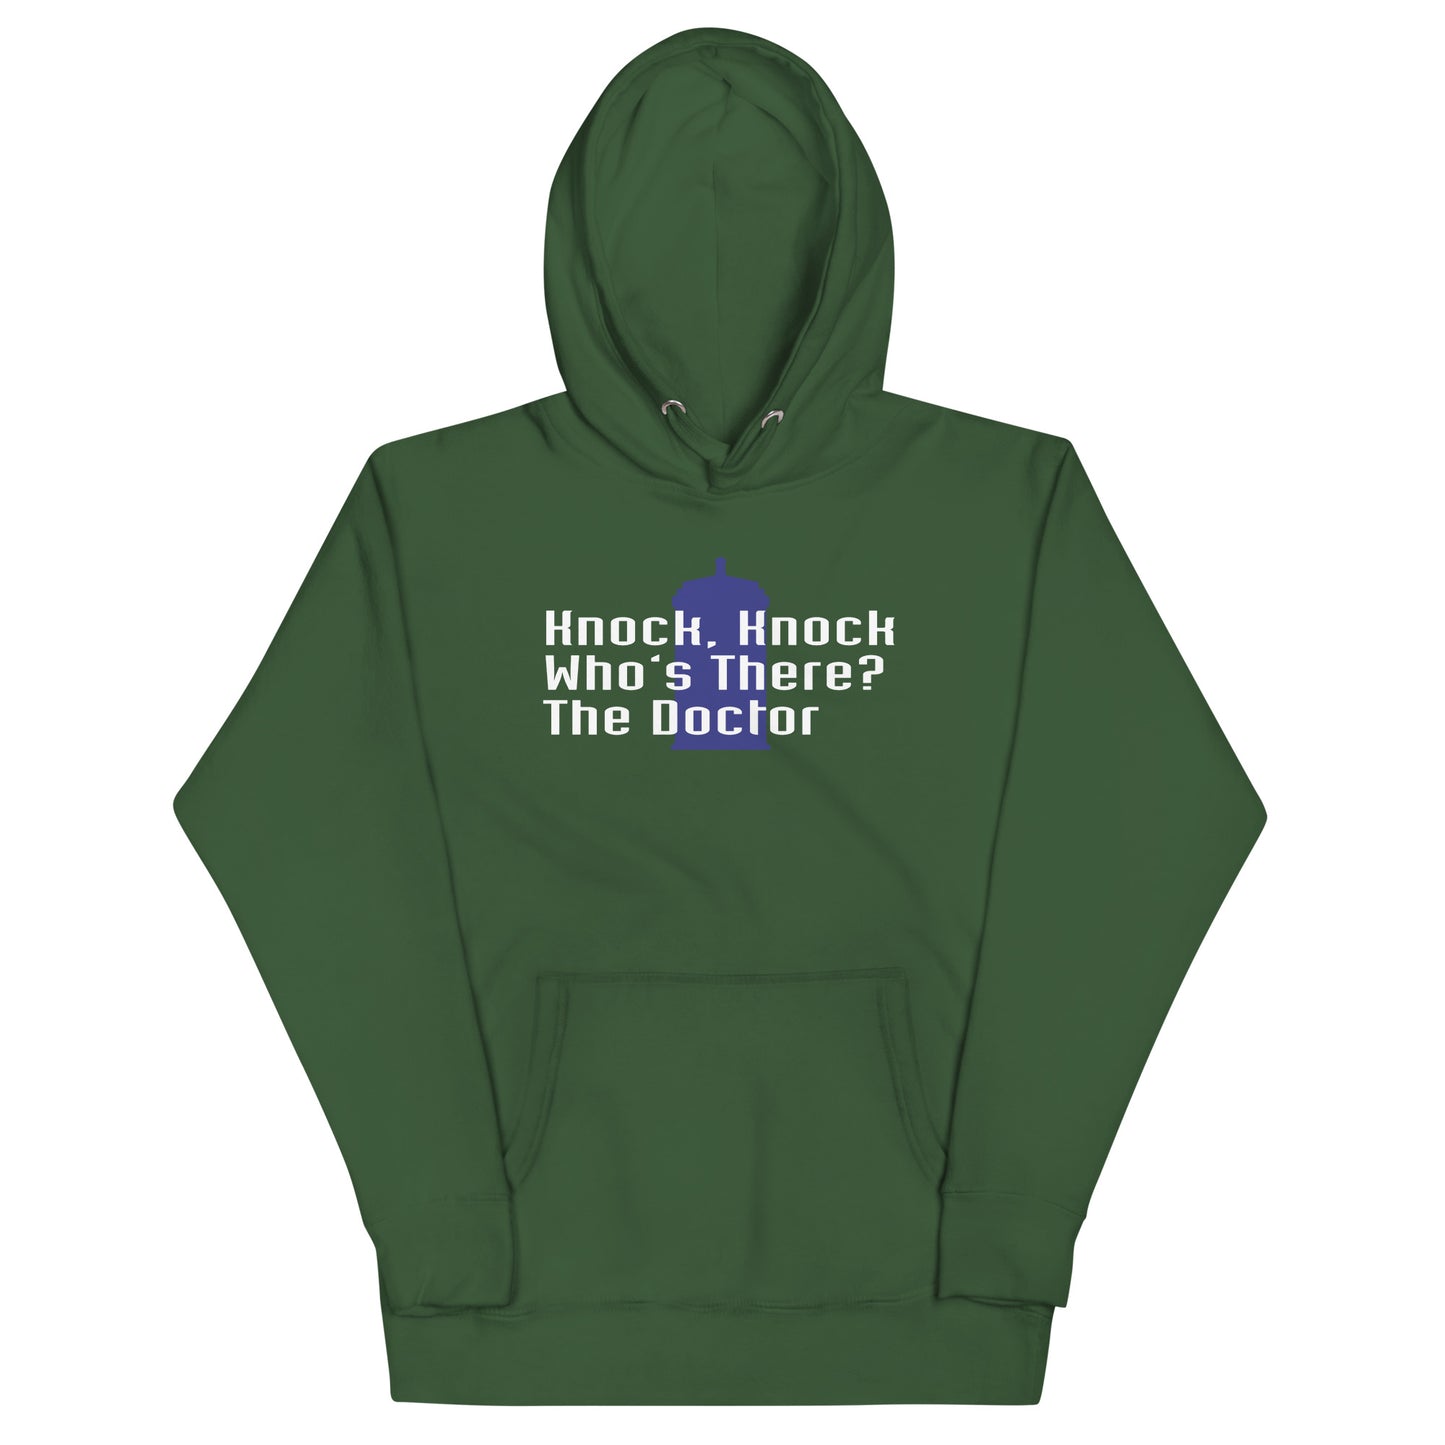 Knock Knock! Who's There? The Doctor Unisex Hoodie